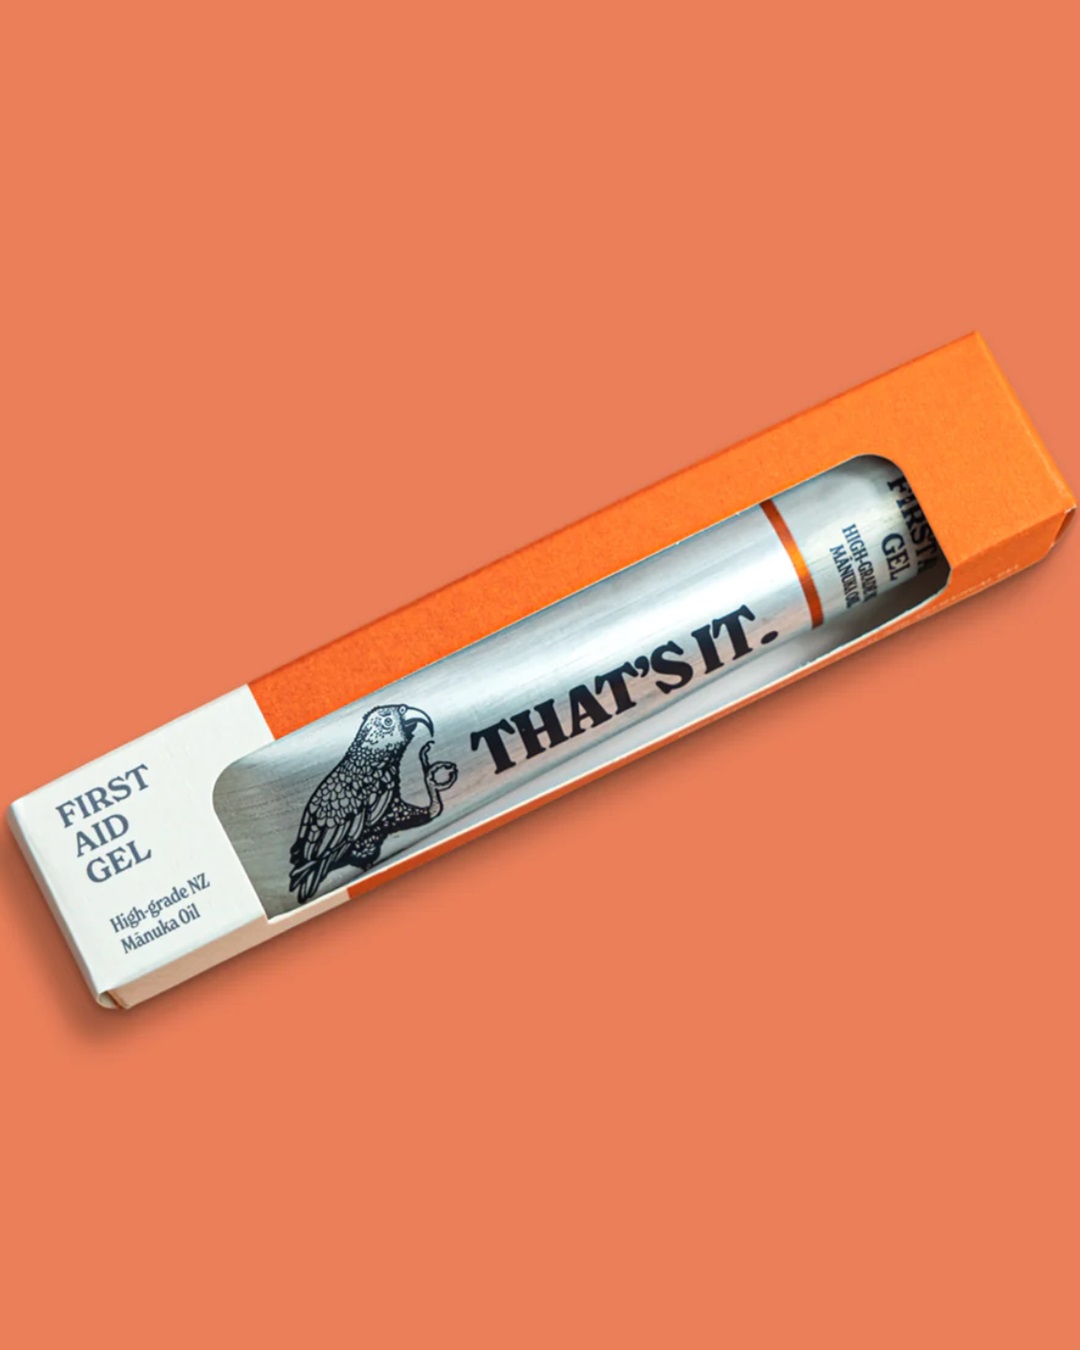 First aid gel silver tube in box on orange background